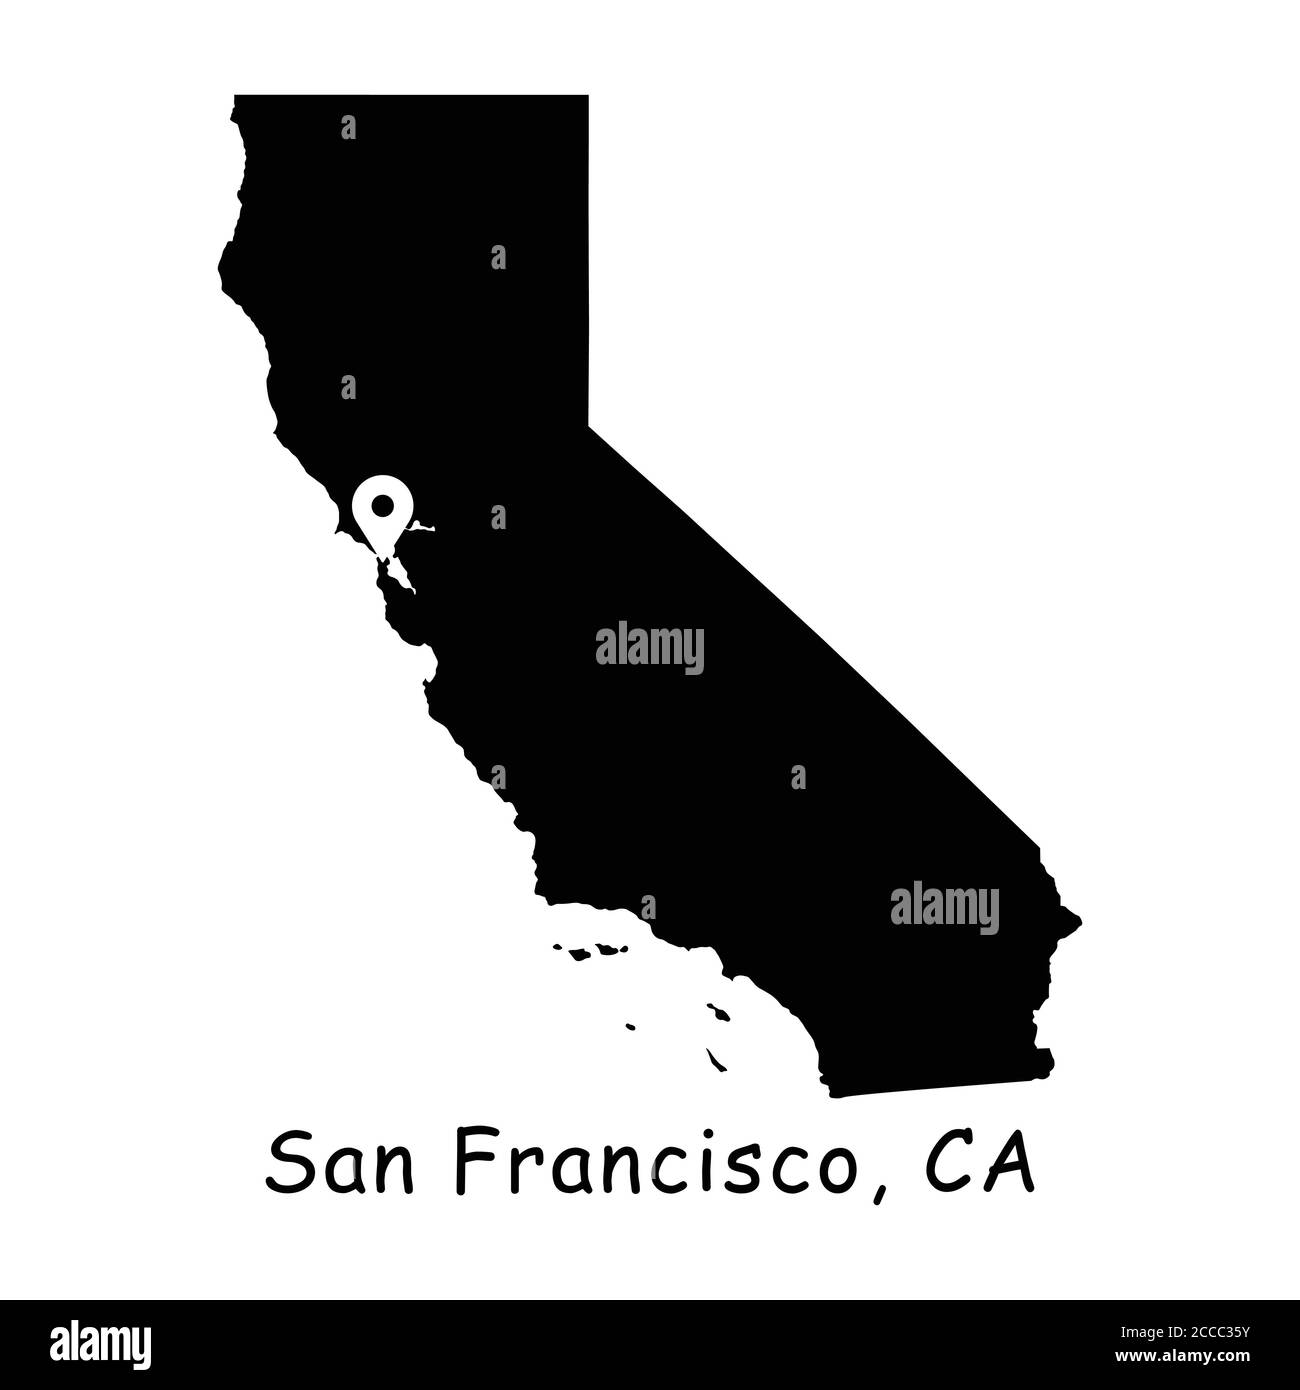 San Francisco on California State Map. Detailed CA State Map with Location Pin on San Francisco Bay Area City. Black silhouette vector map isolated on Stock Vector